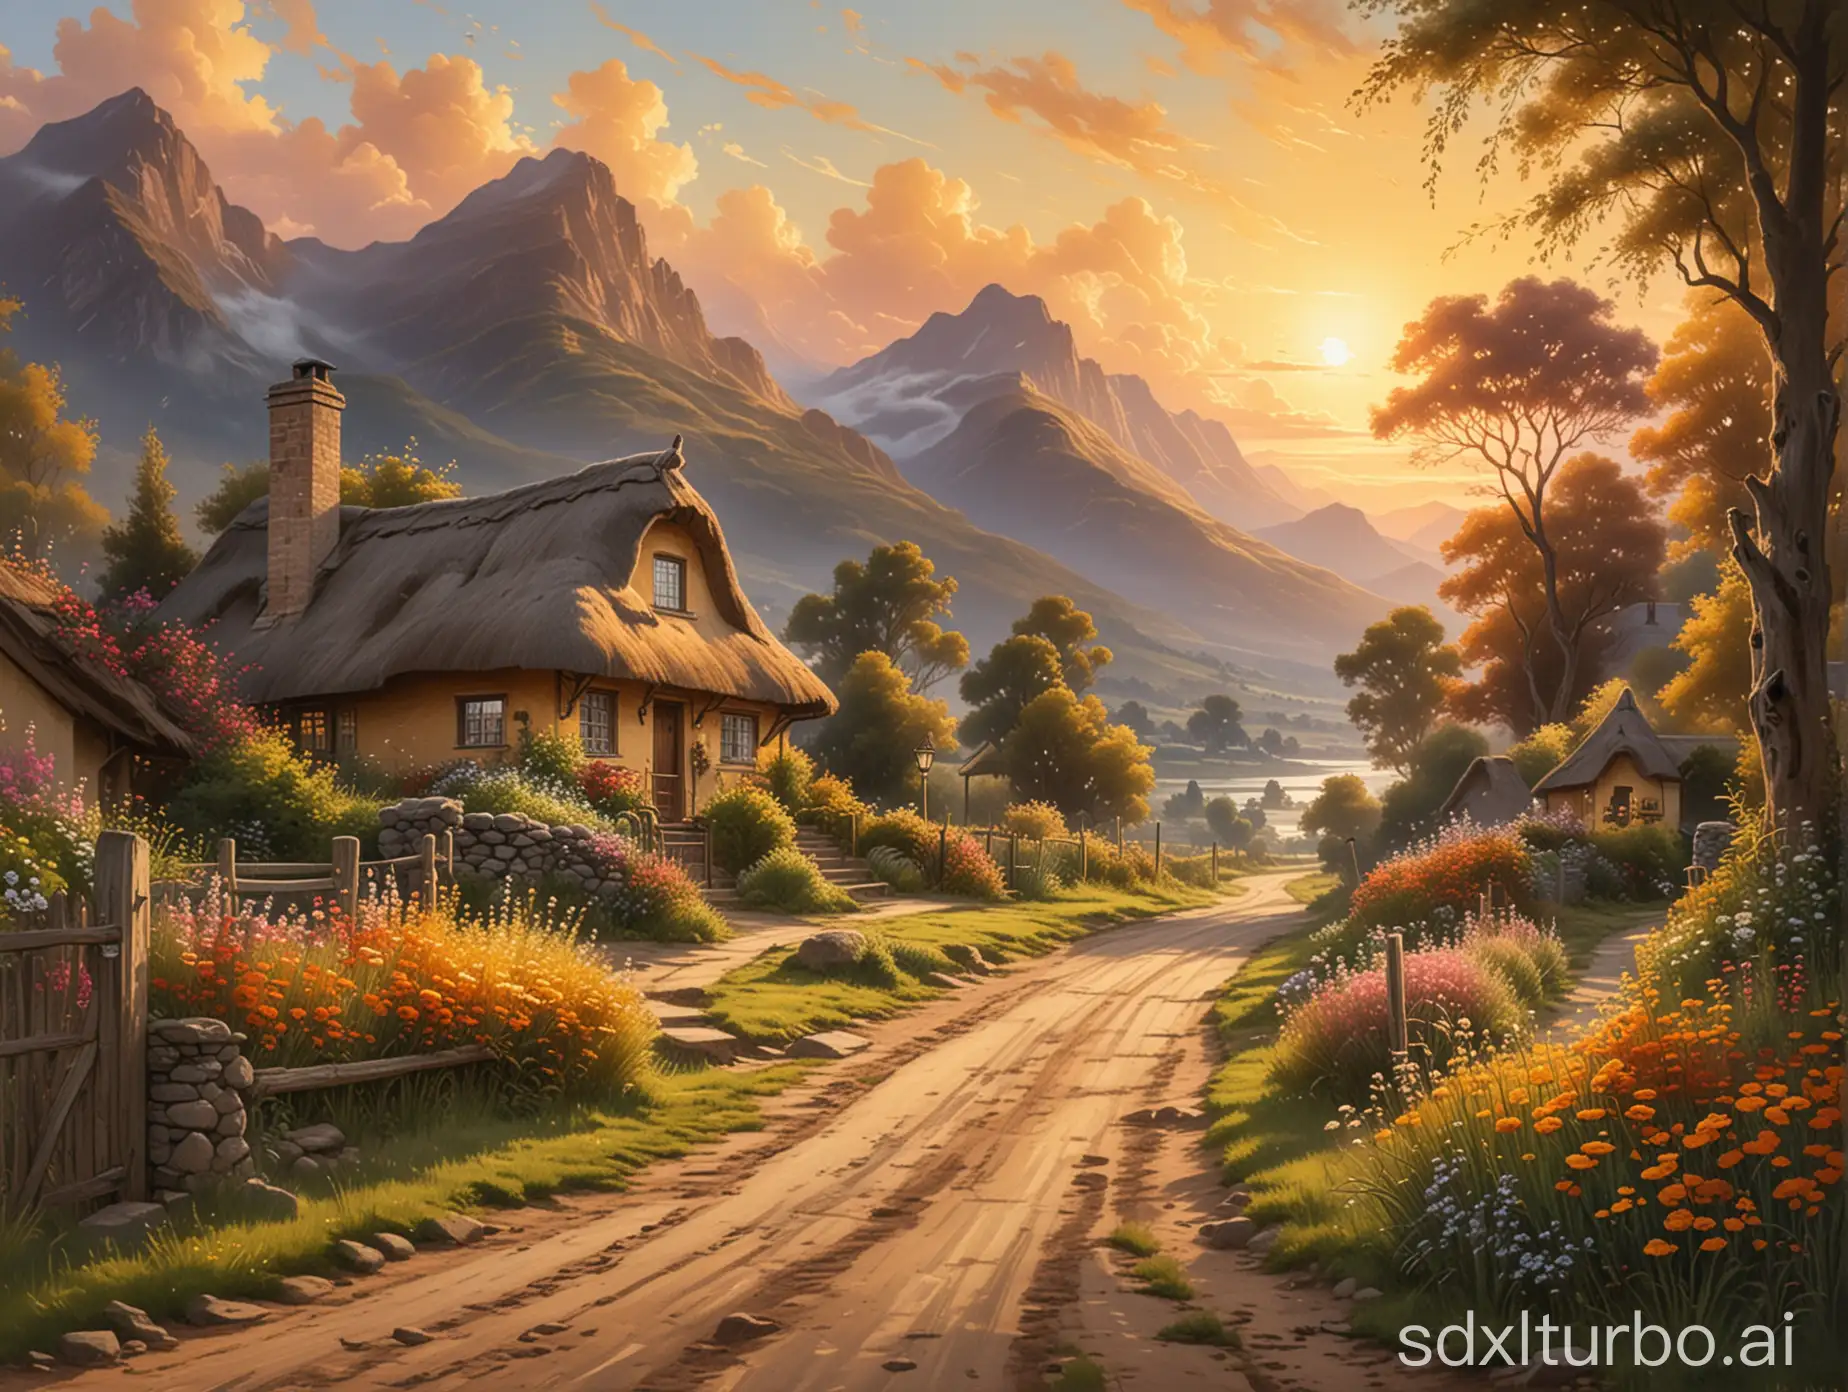 A long and narrow dirt road, lined with flowers and grass on both sides, leads to a thatched cottage emitting smoke at the end of the road. The painting on the cottage depicts mountains and forests, with the setting sun above the mountains, warm hues, light and shadow, high contrast, details, a golden sky, and colorful clouds.